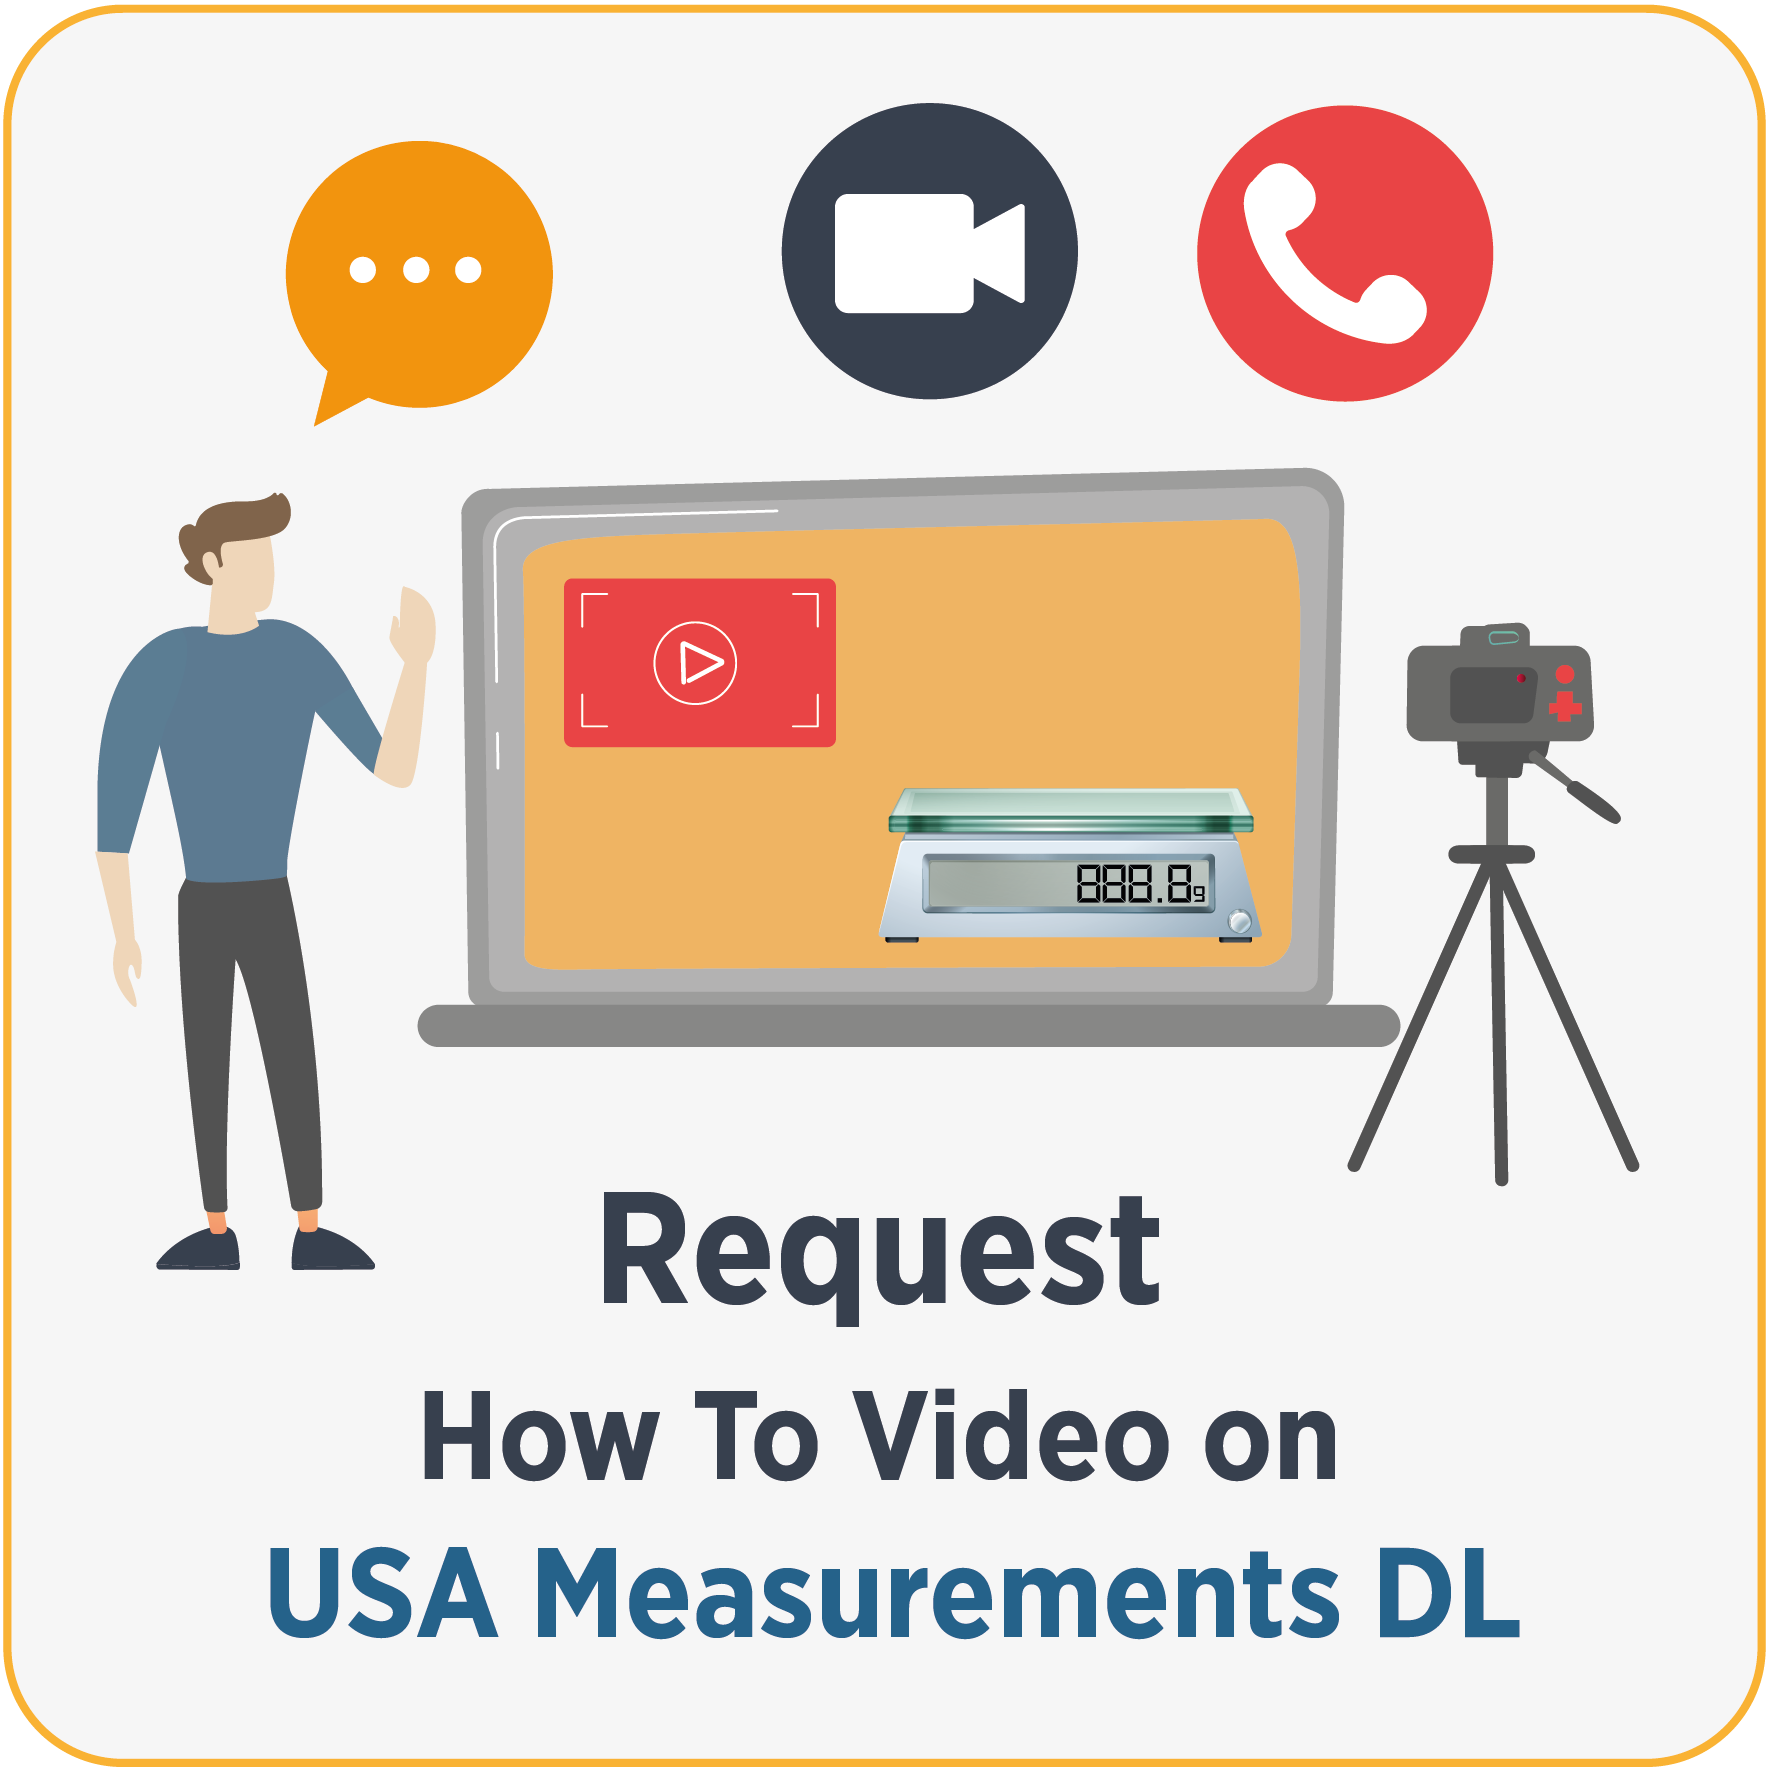 Commission a "How To" Video about subject on USA Measurements DL